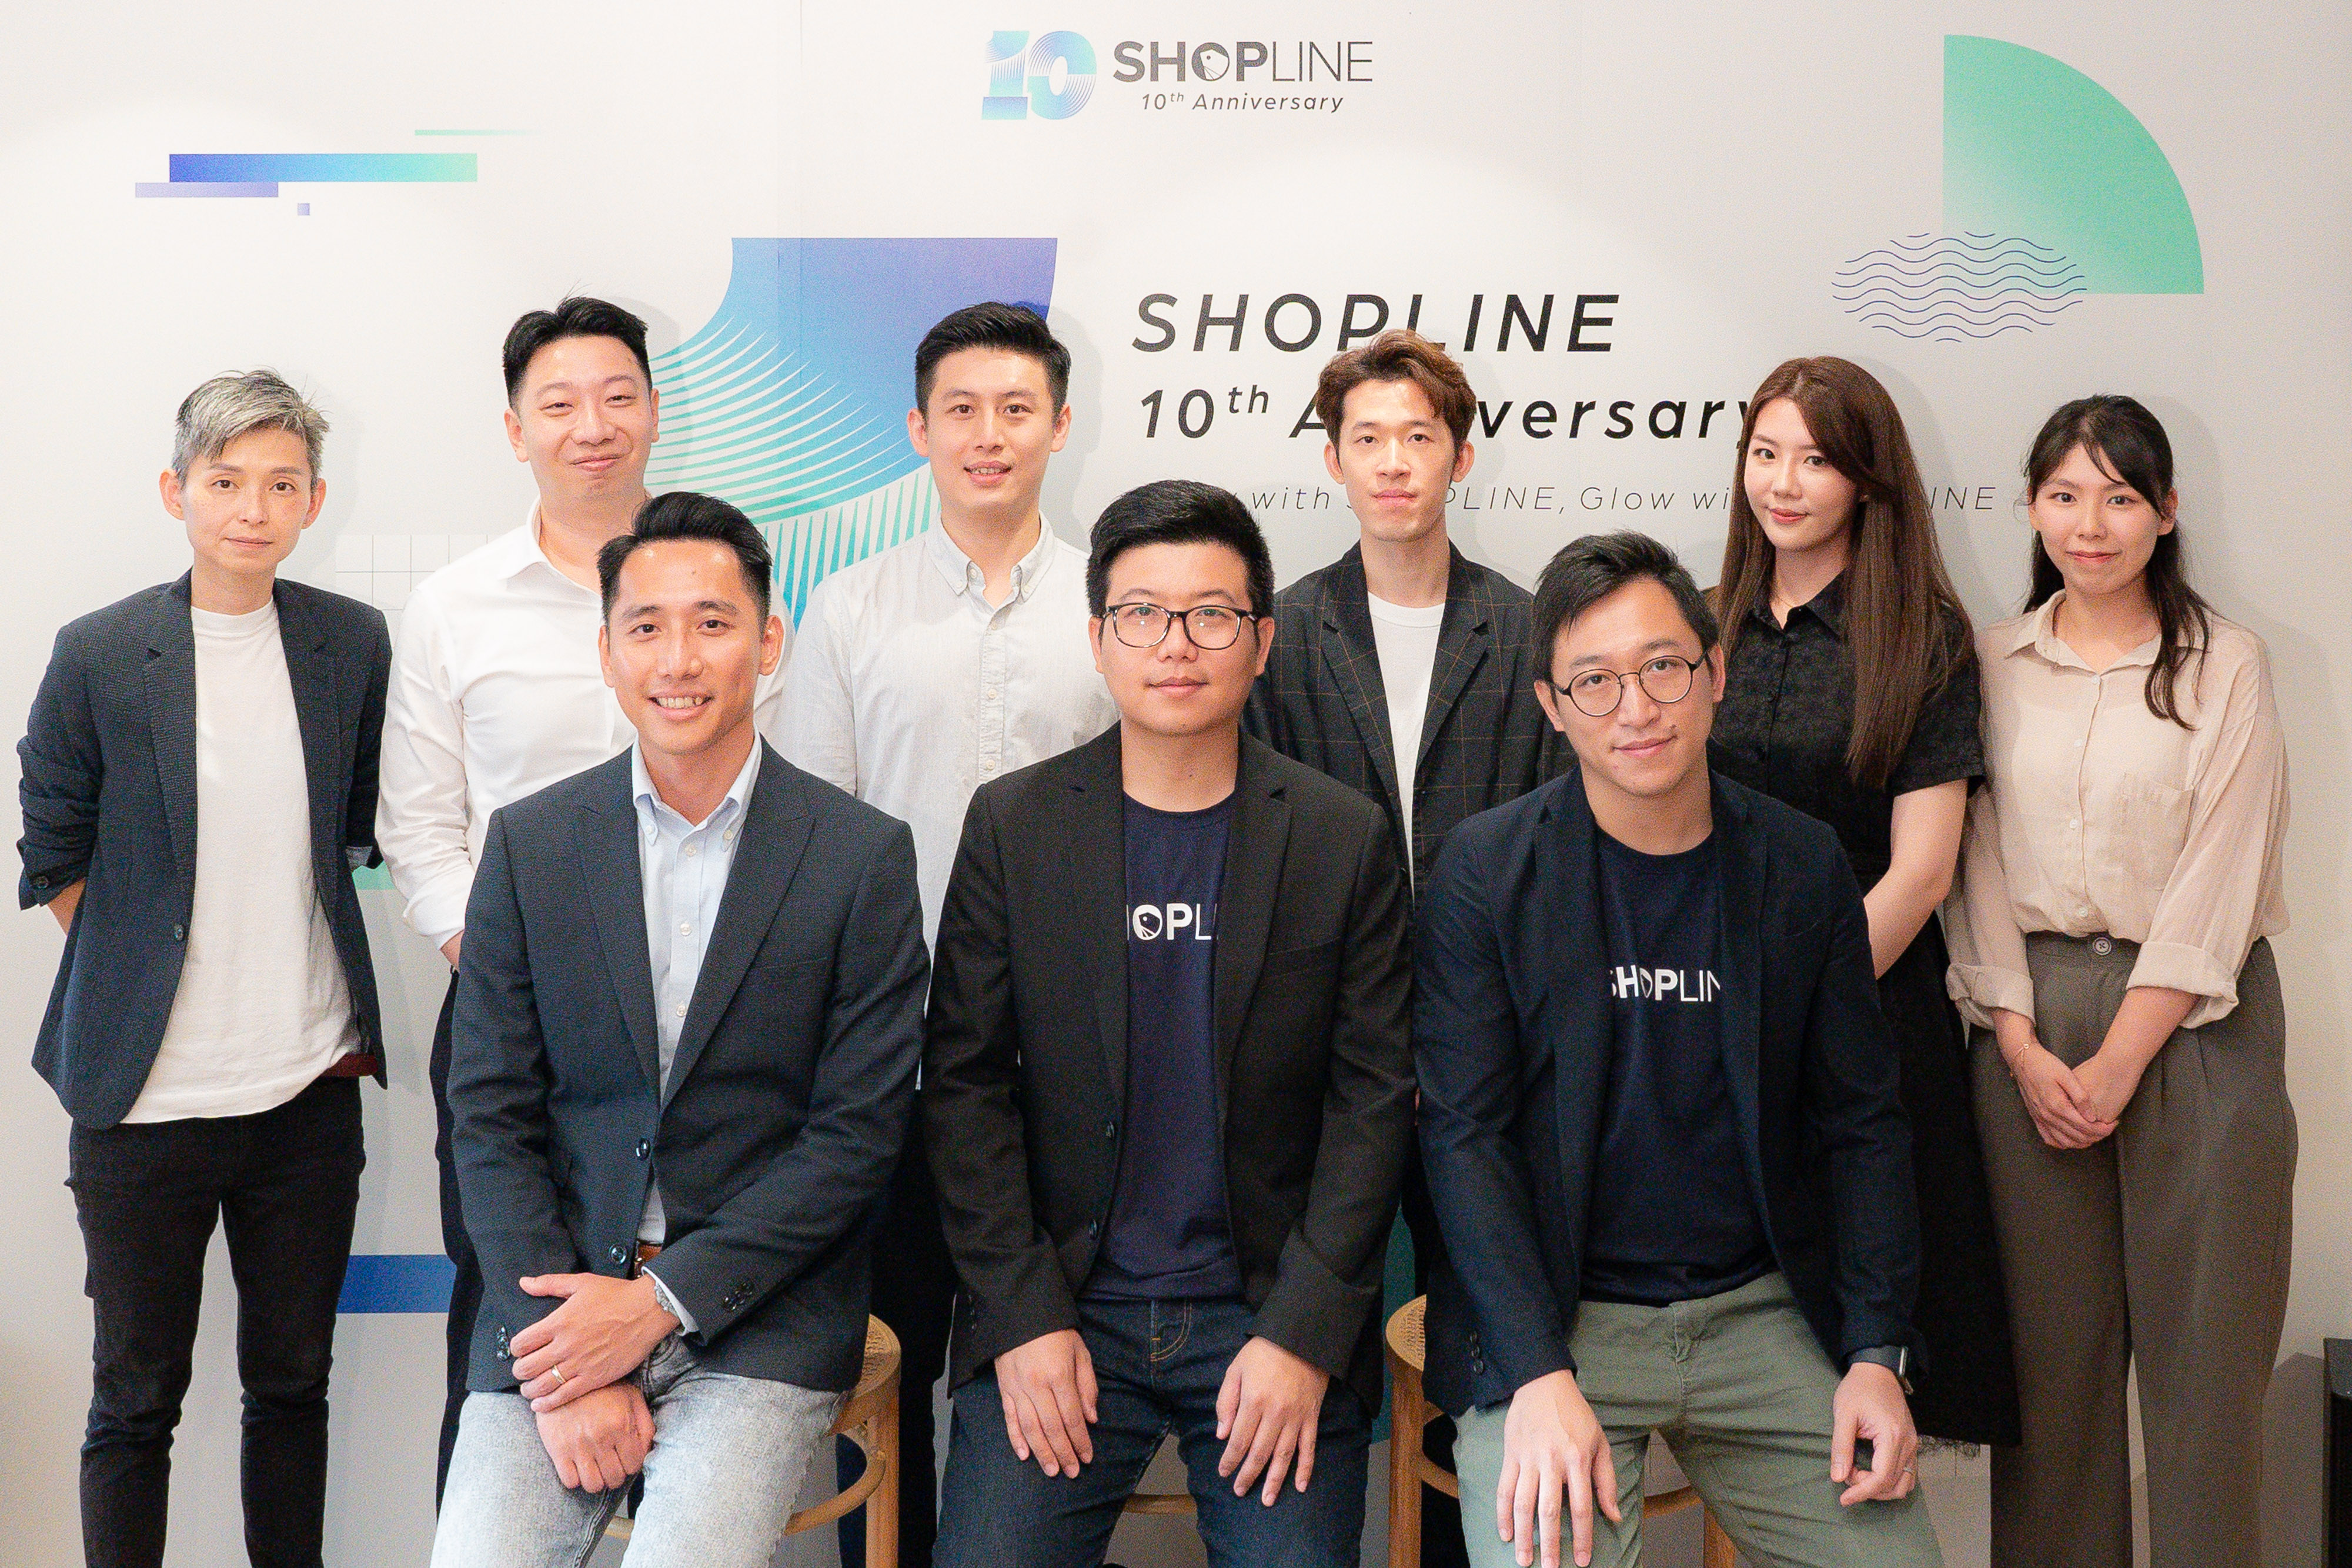 Nick Gao, General Manager of SHOPLINE Hong Kong (front row, second from left), took a group photo with guests who attended the New Retail industry networking event.